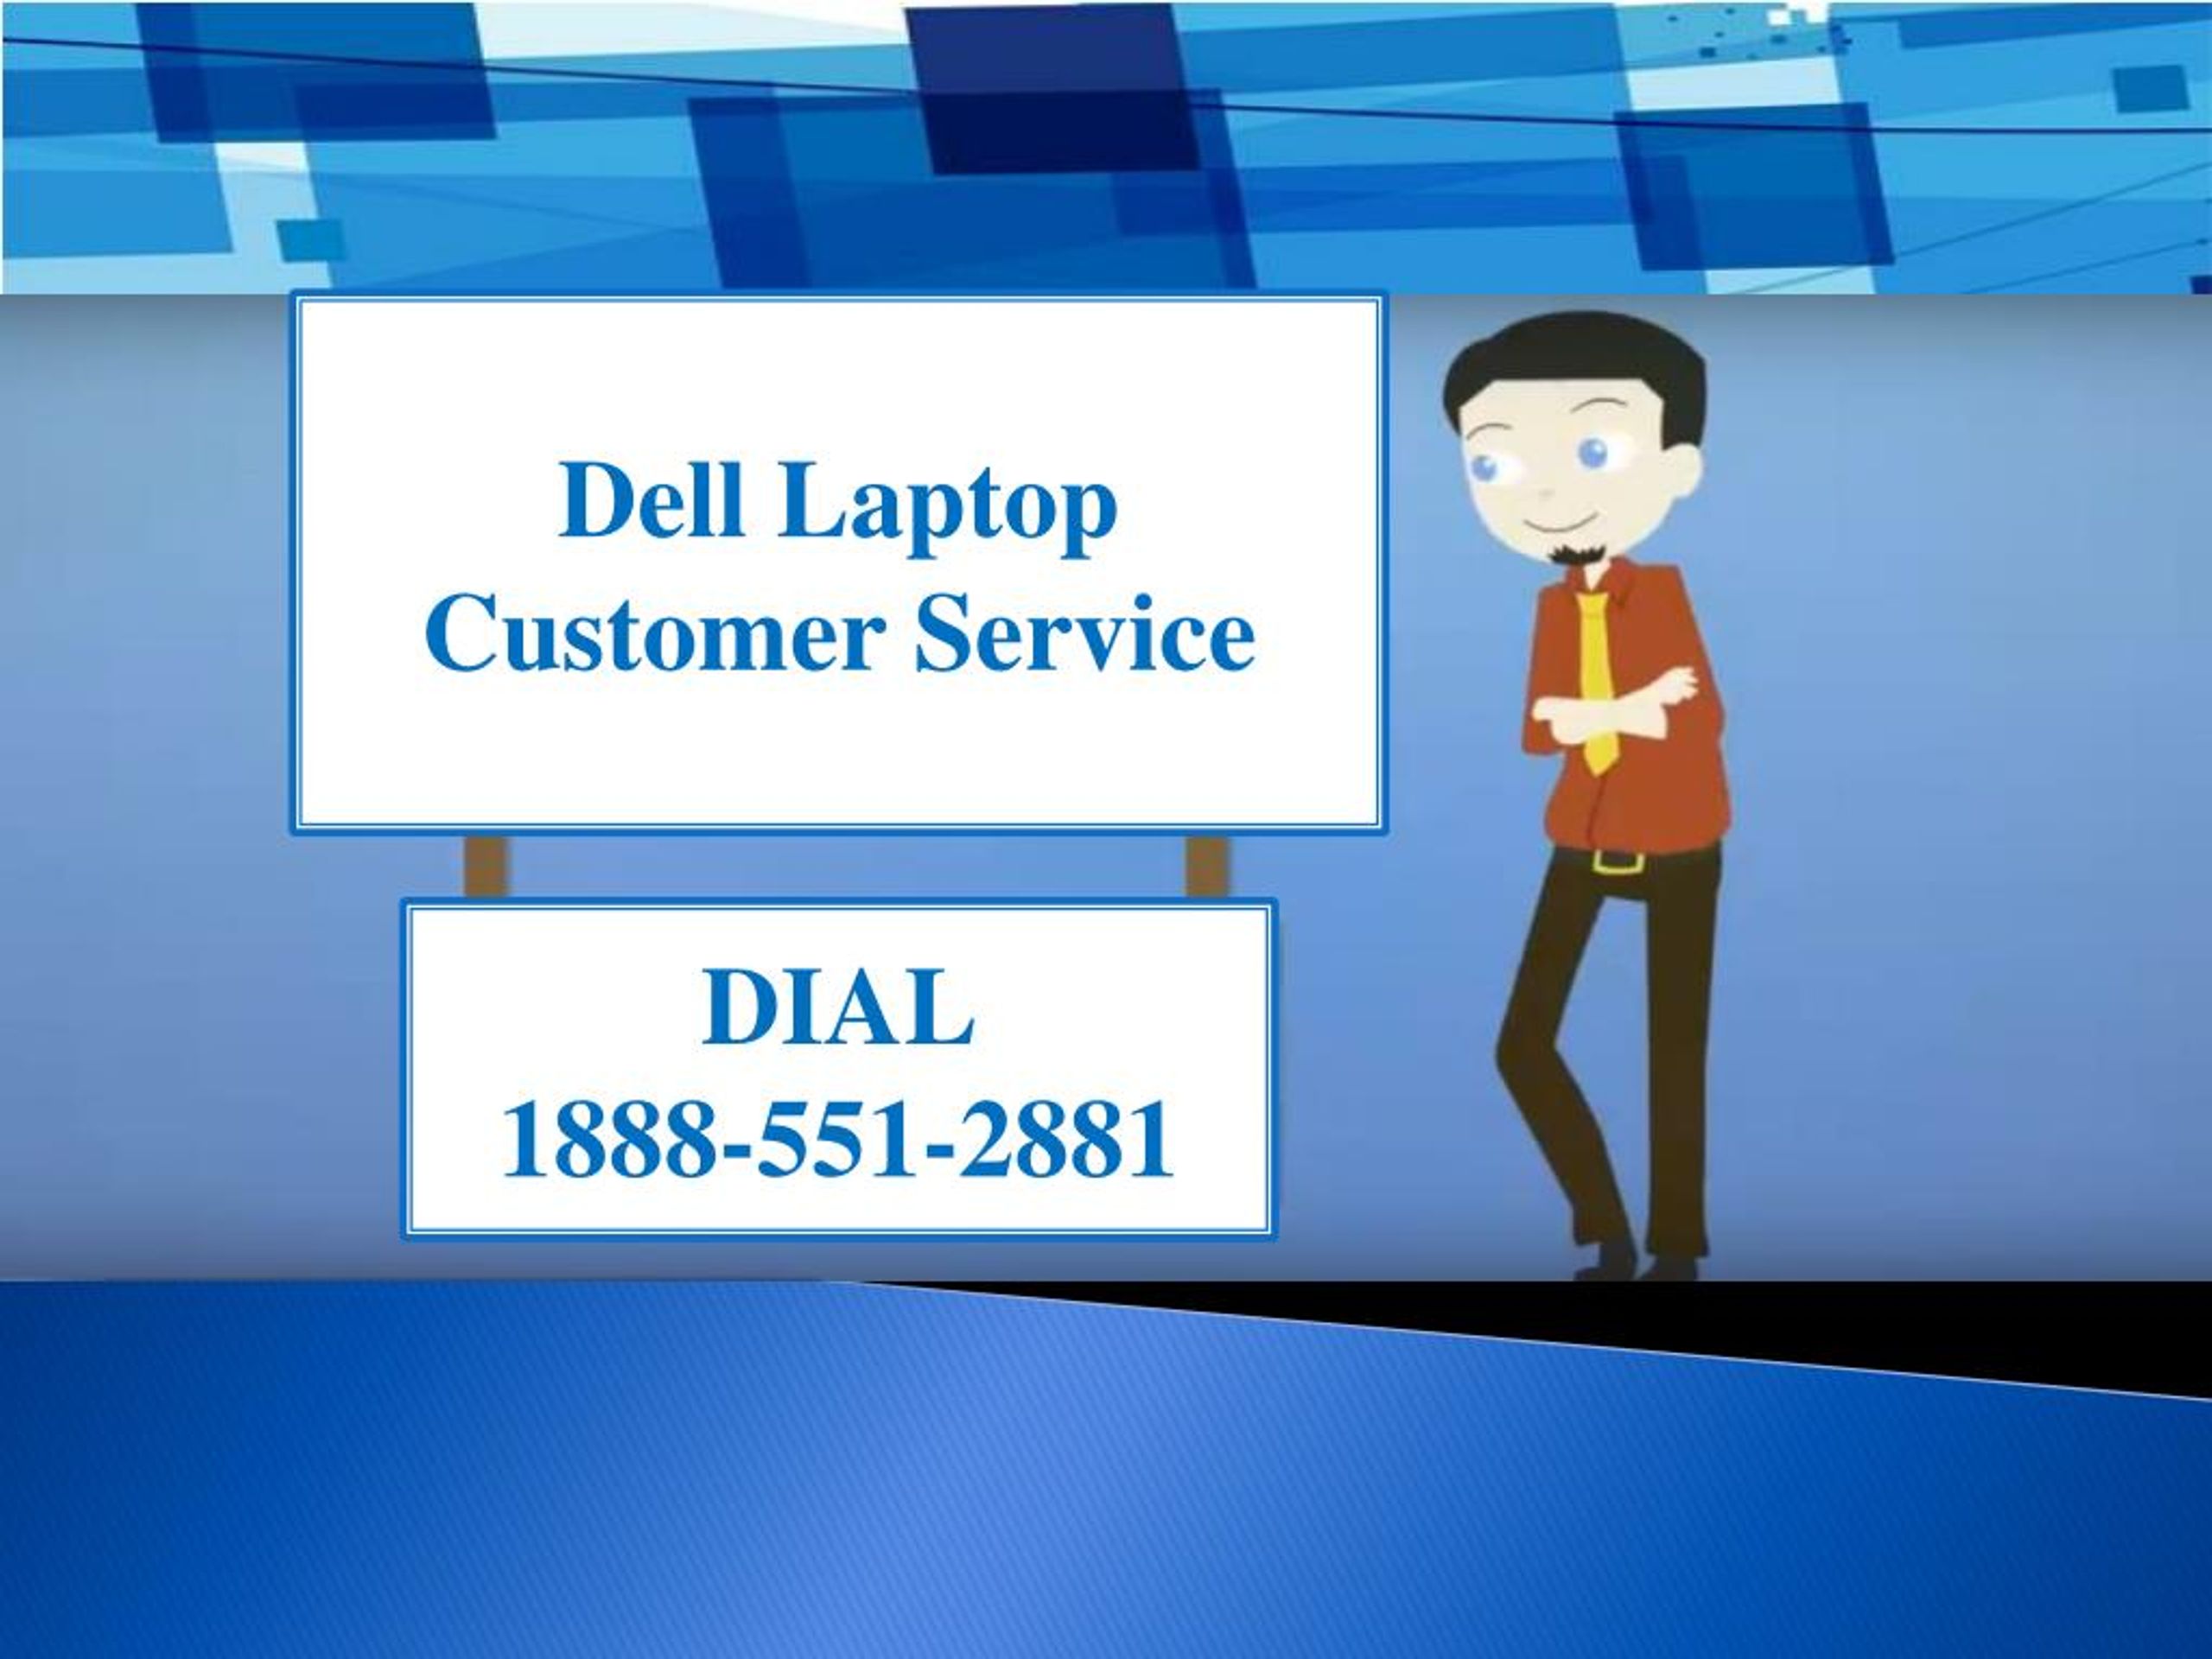 PPT - Dell Laptop Helpline Number | Dell Laptop Customer Service Phone Number PowerPoint ...